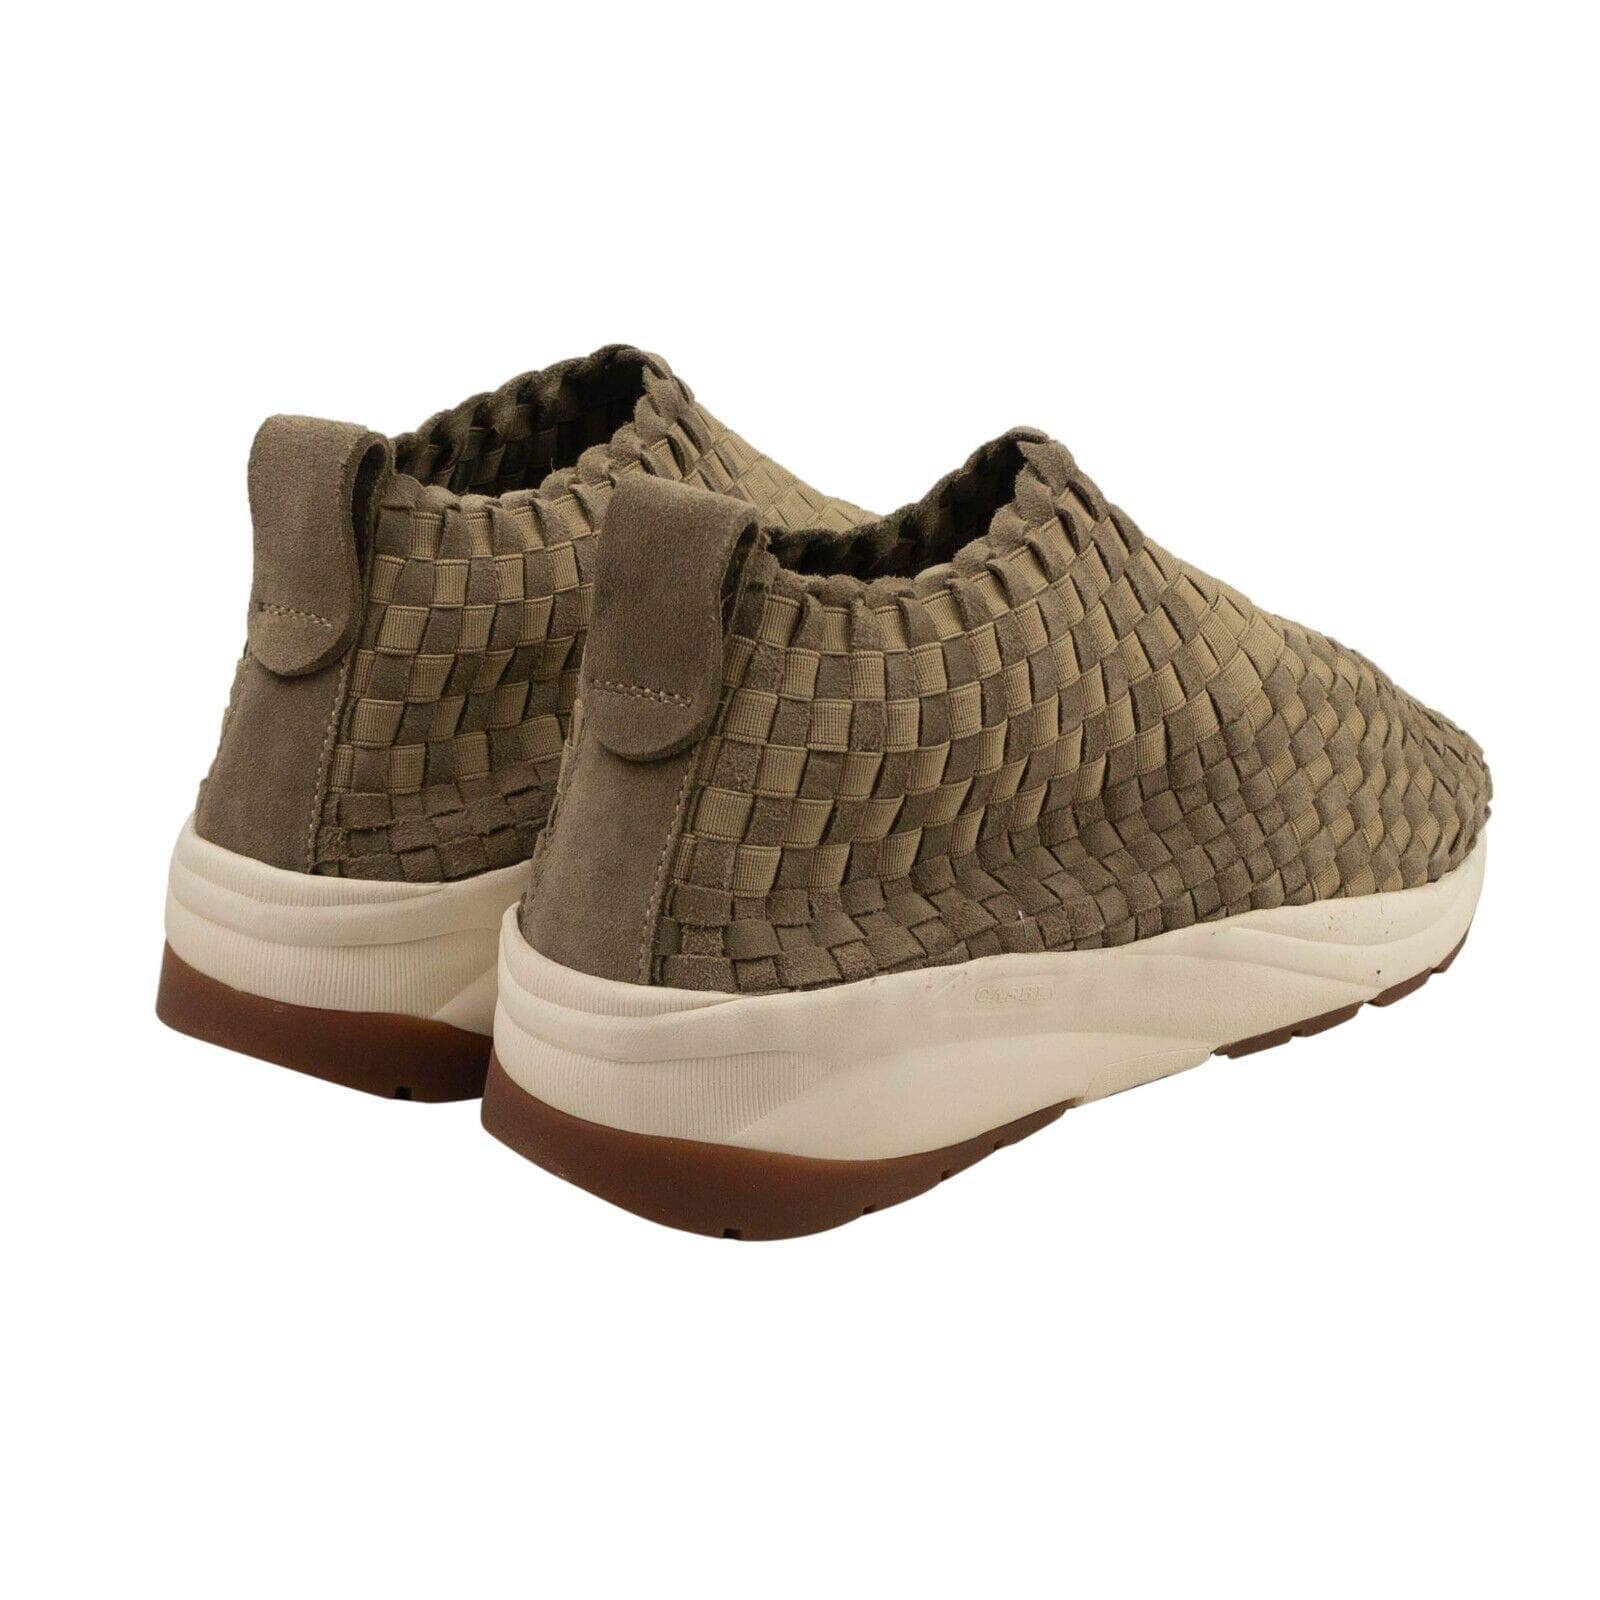 Casbia casbia, channelenable-all, chicmi, couponcollection, gender-mens, main-shoes, mens-shoes, MixedApparel, size-40, size-41, size-42, size-43, size-44, size-45, size-46, under-250 Beige Man Rev Slip On Sneakers